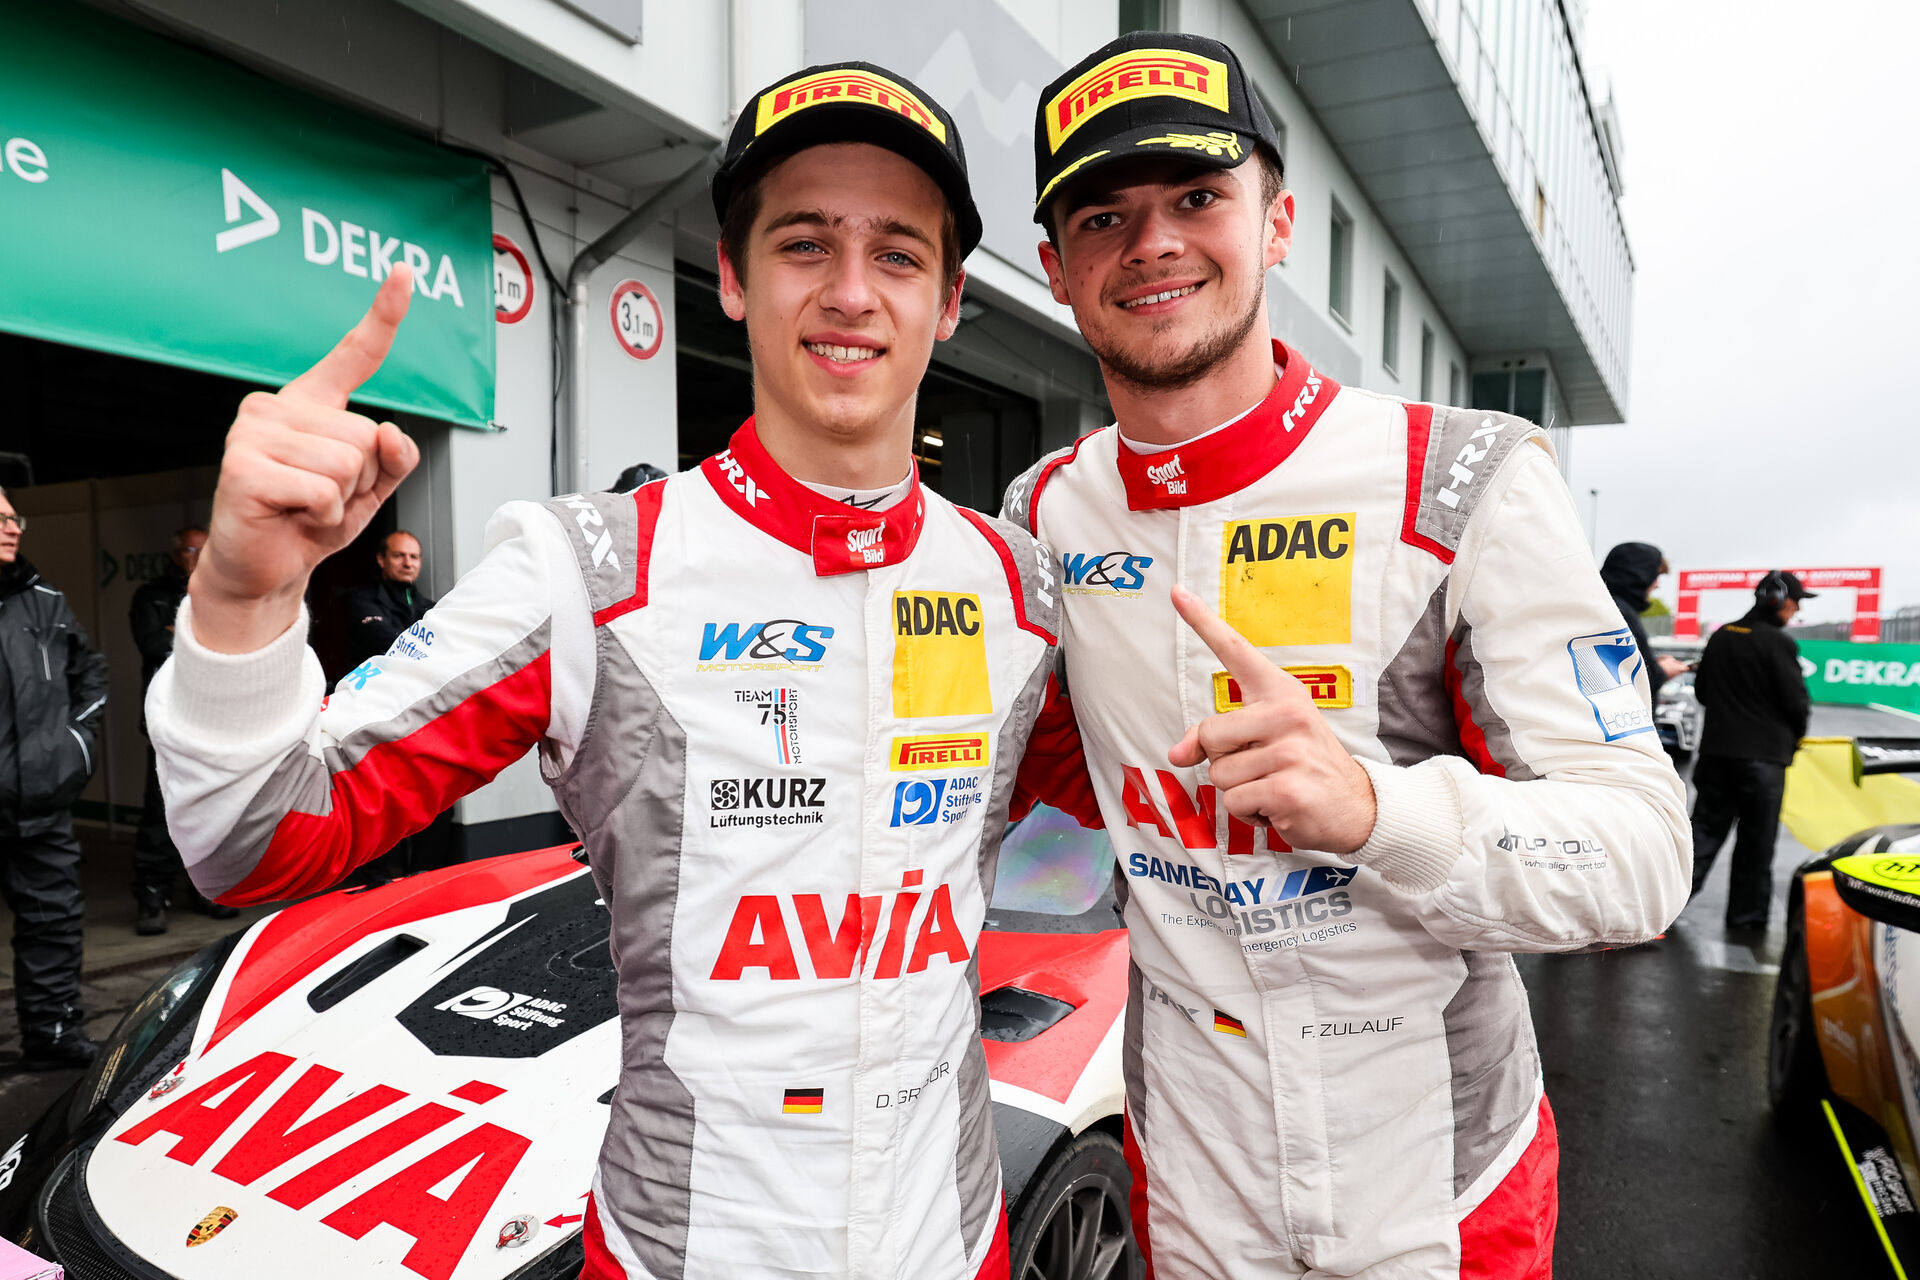 Two class wins and second overall for AVIA W&S Motorsport in rain battle in  ADAC GT4